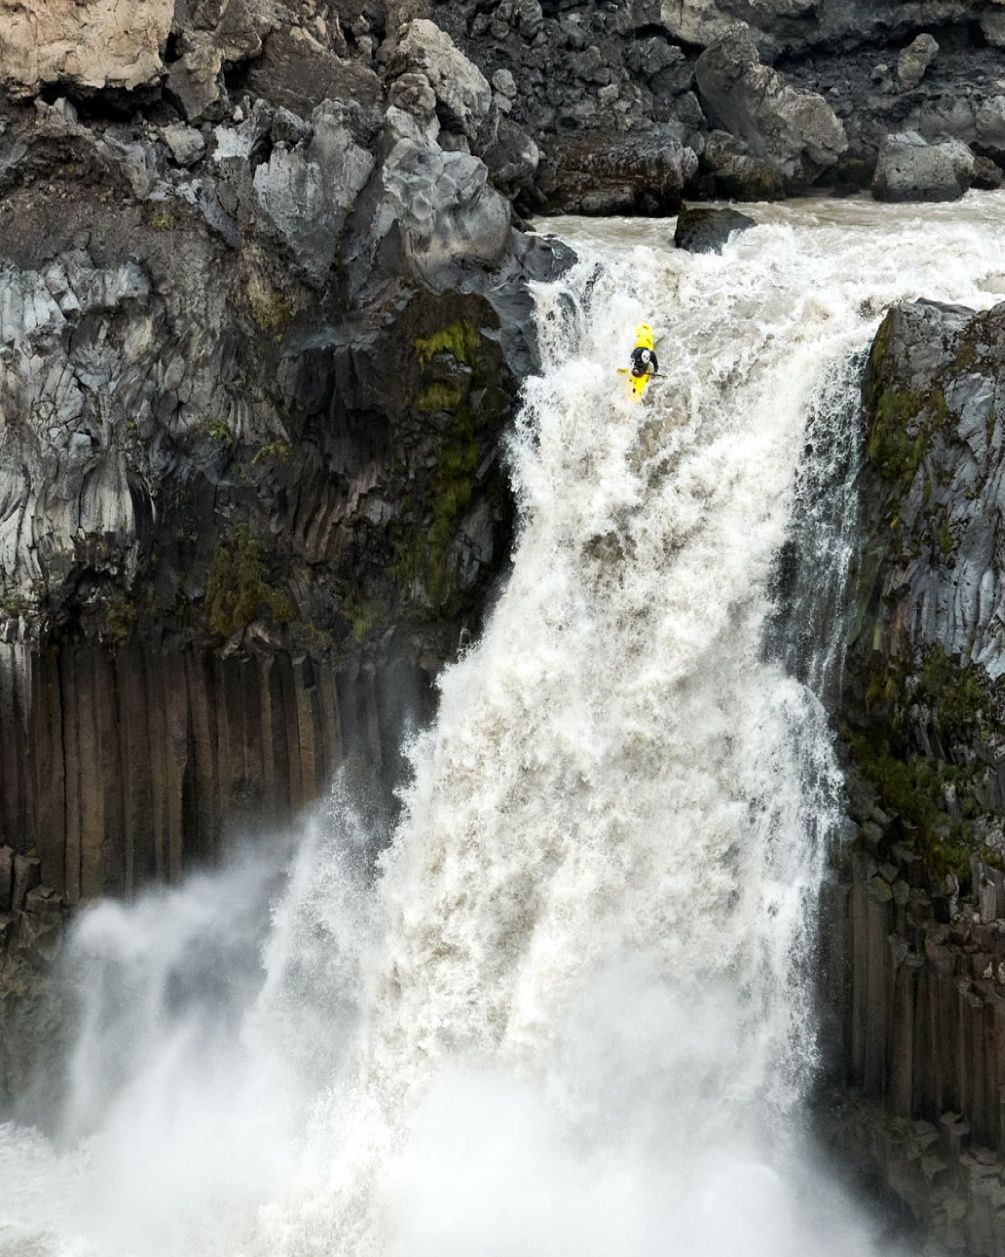 A person in a kayak goes over the edge and starts to descend on a large waterfall.